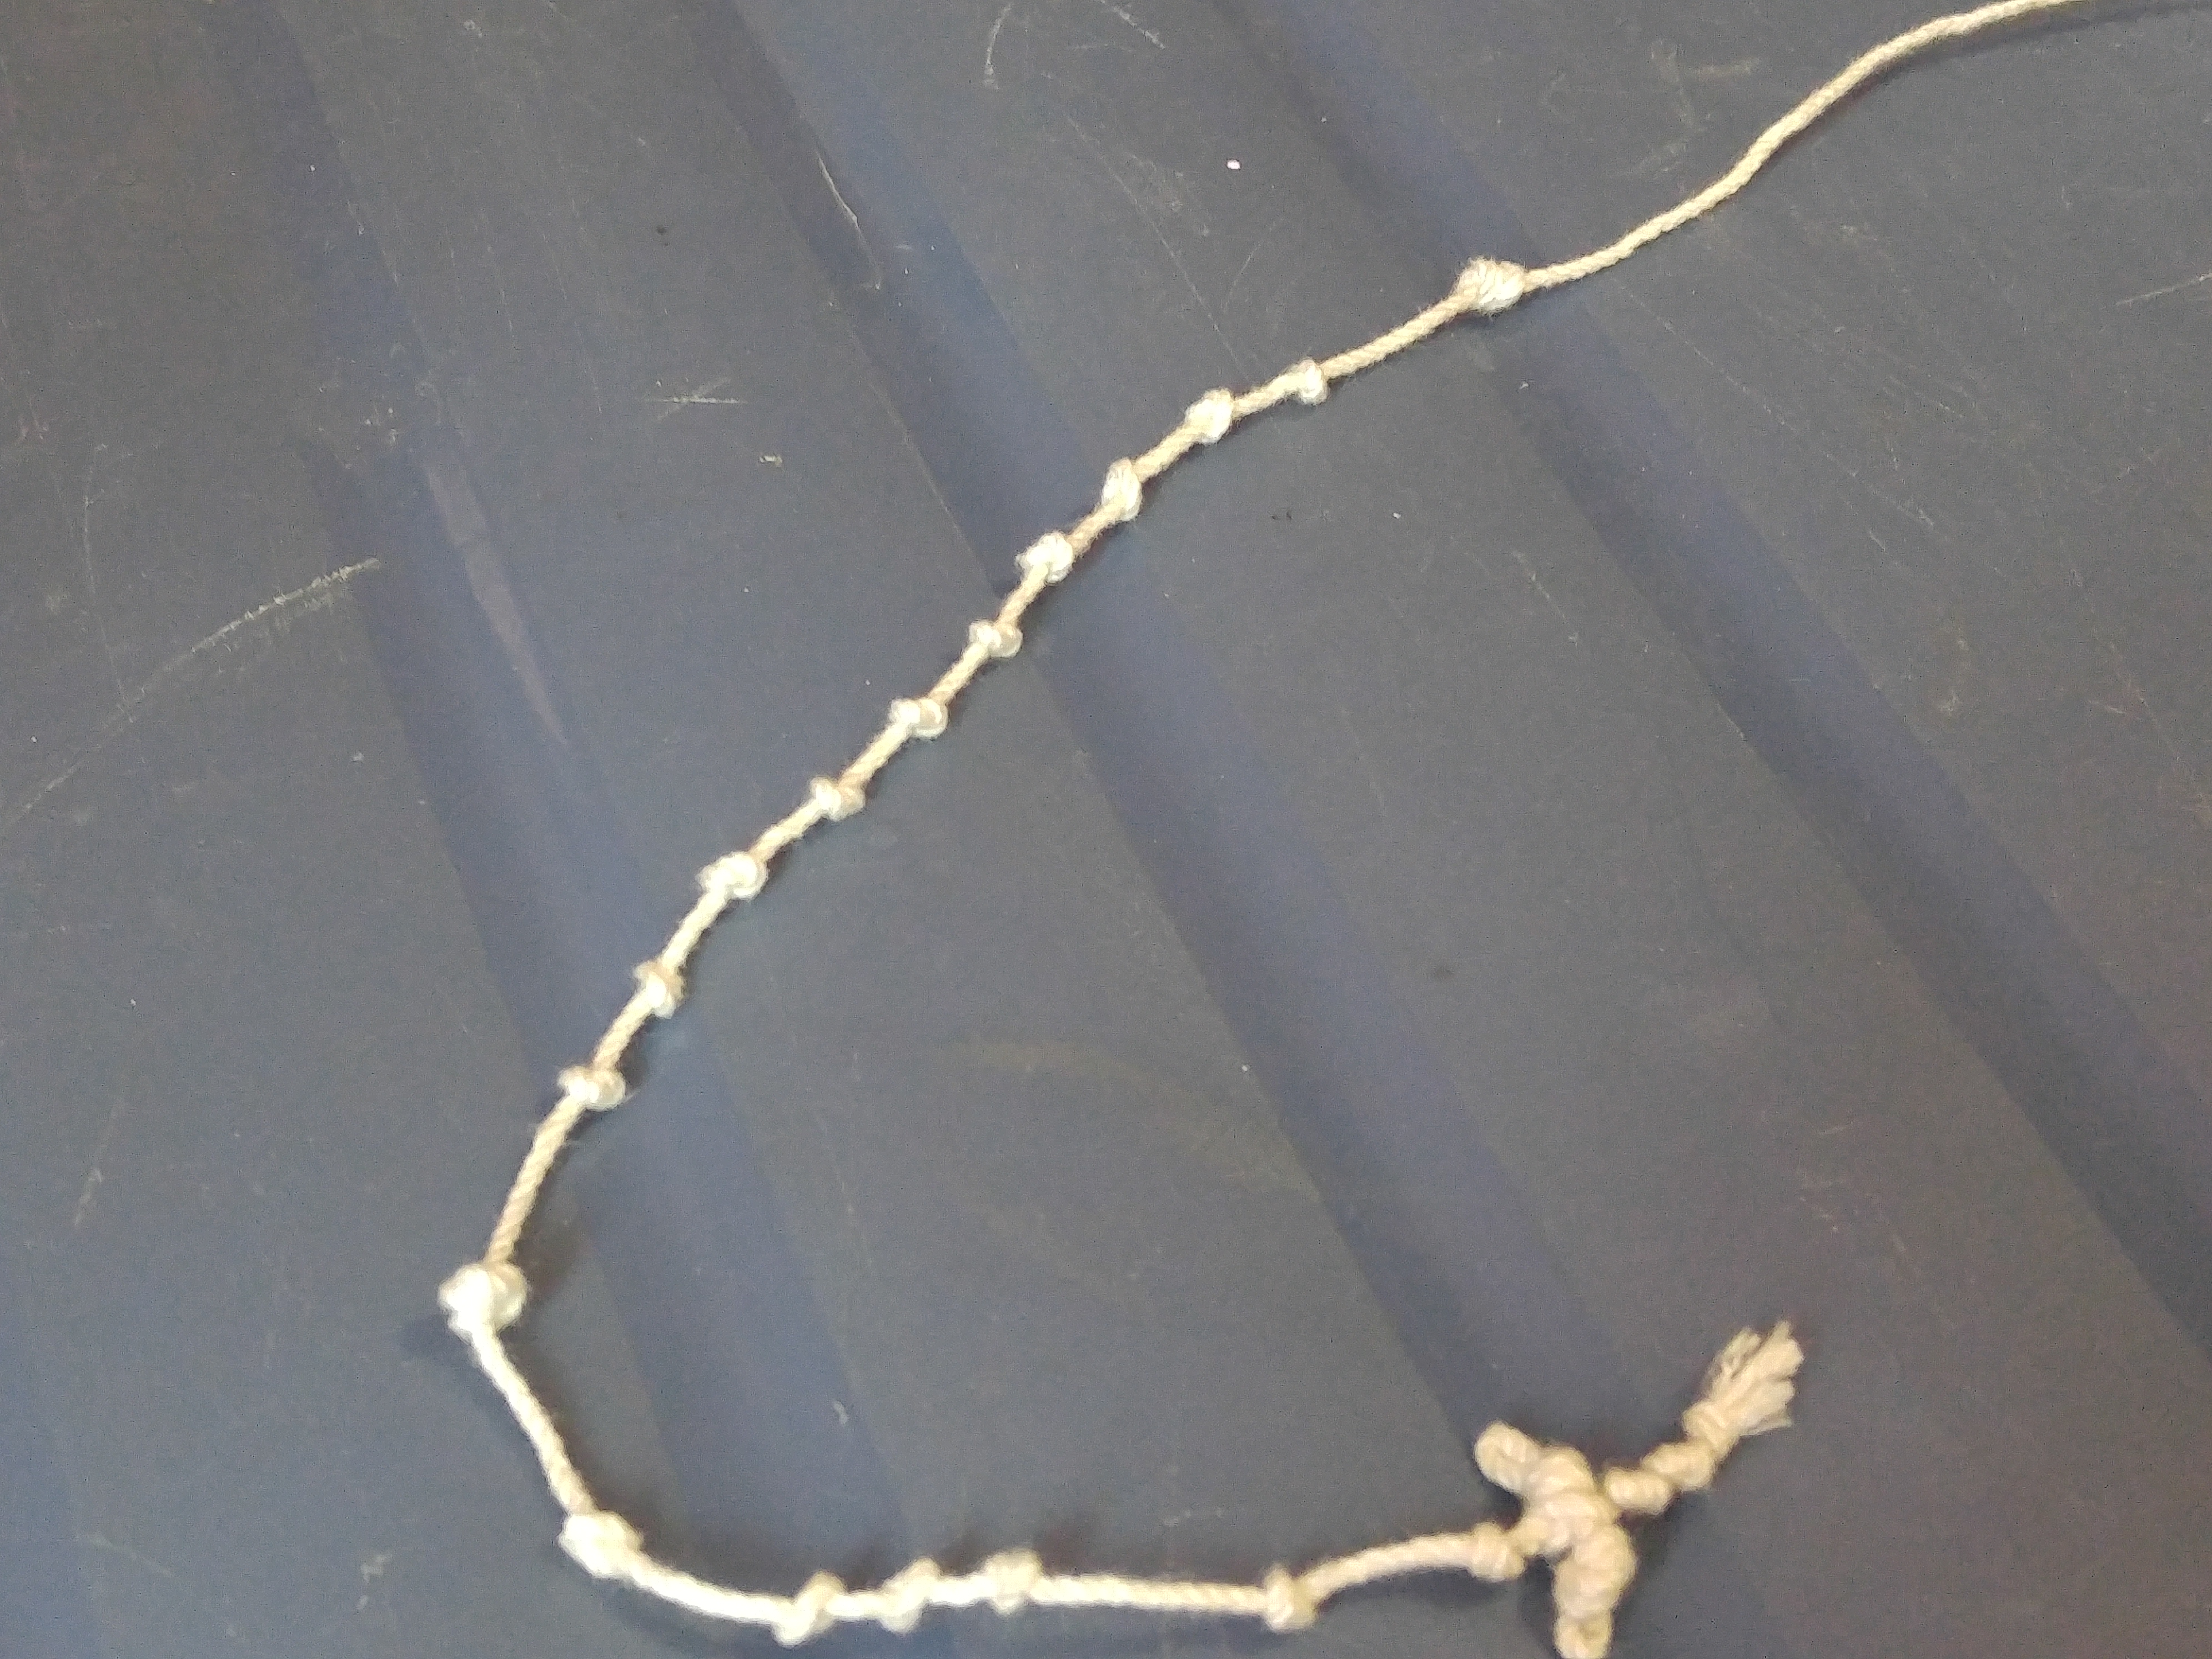 A loop of the string, with over a dozen knots tied into it, laying in a curve.